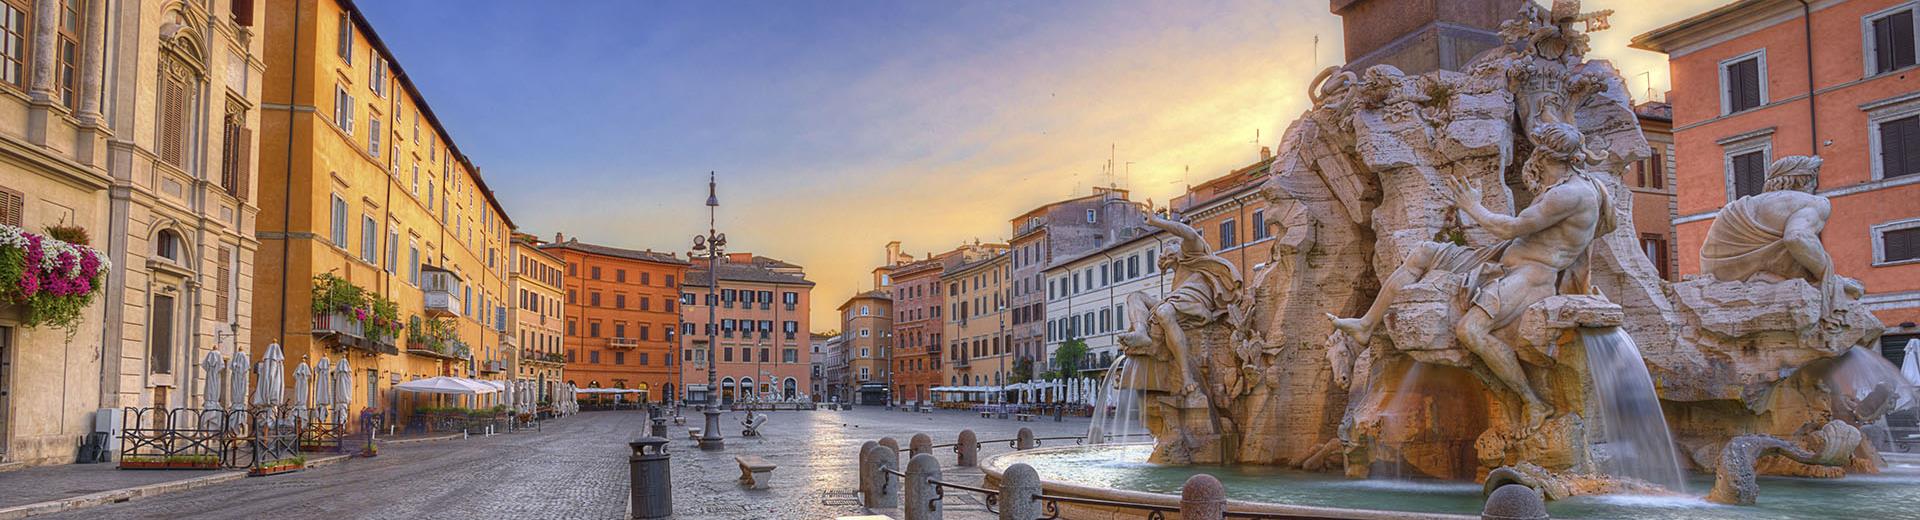 Book your 4 star hotel in Rome near the Termini station